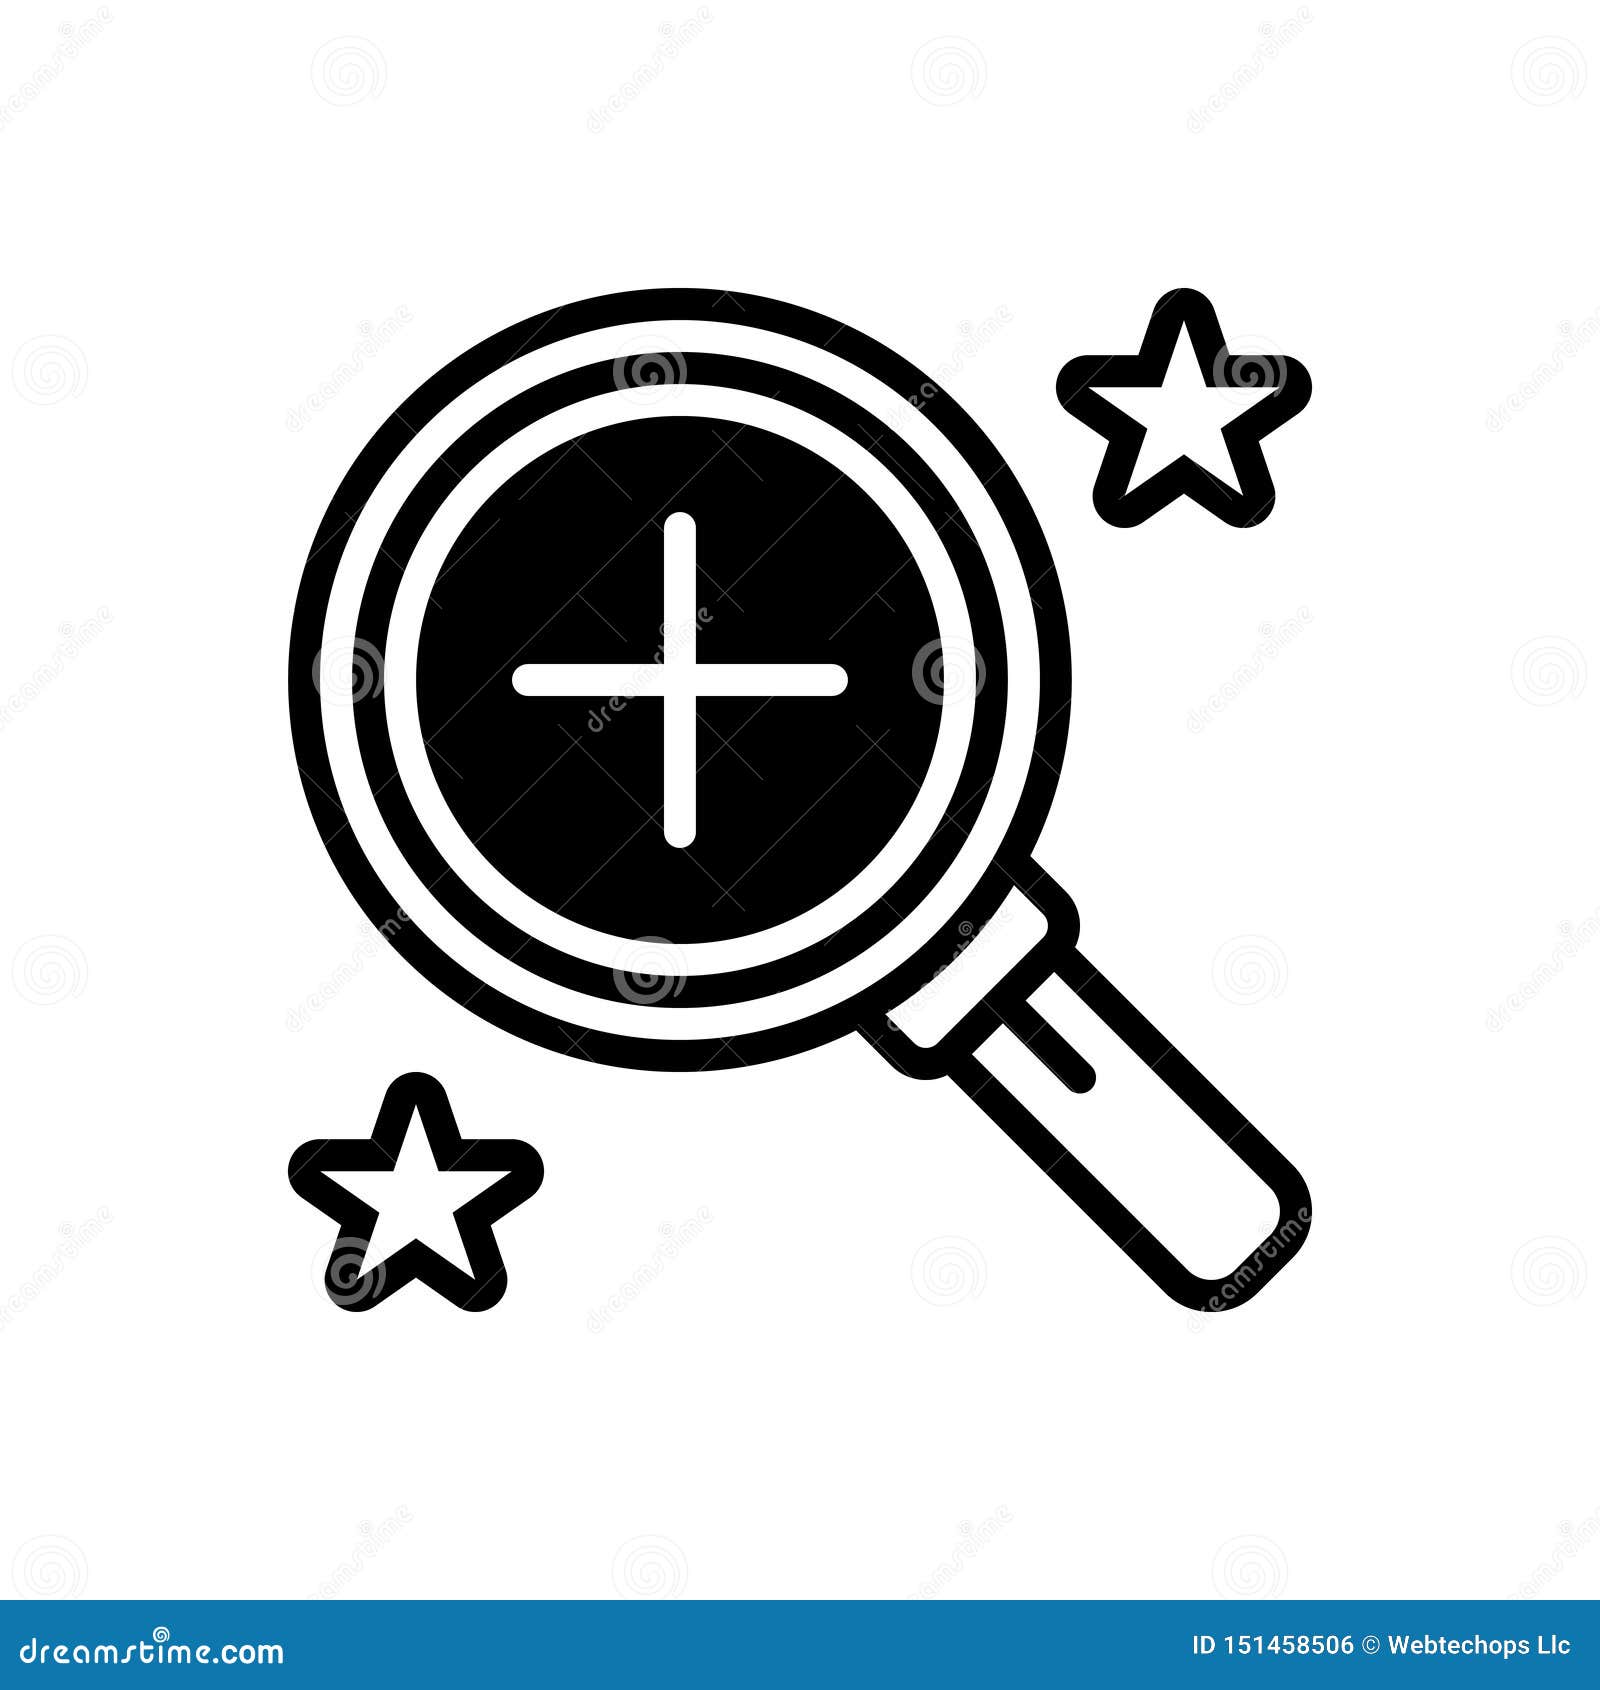 black solid icon for overview, inspection and oversight